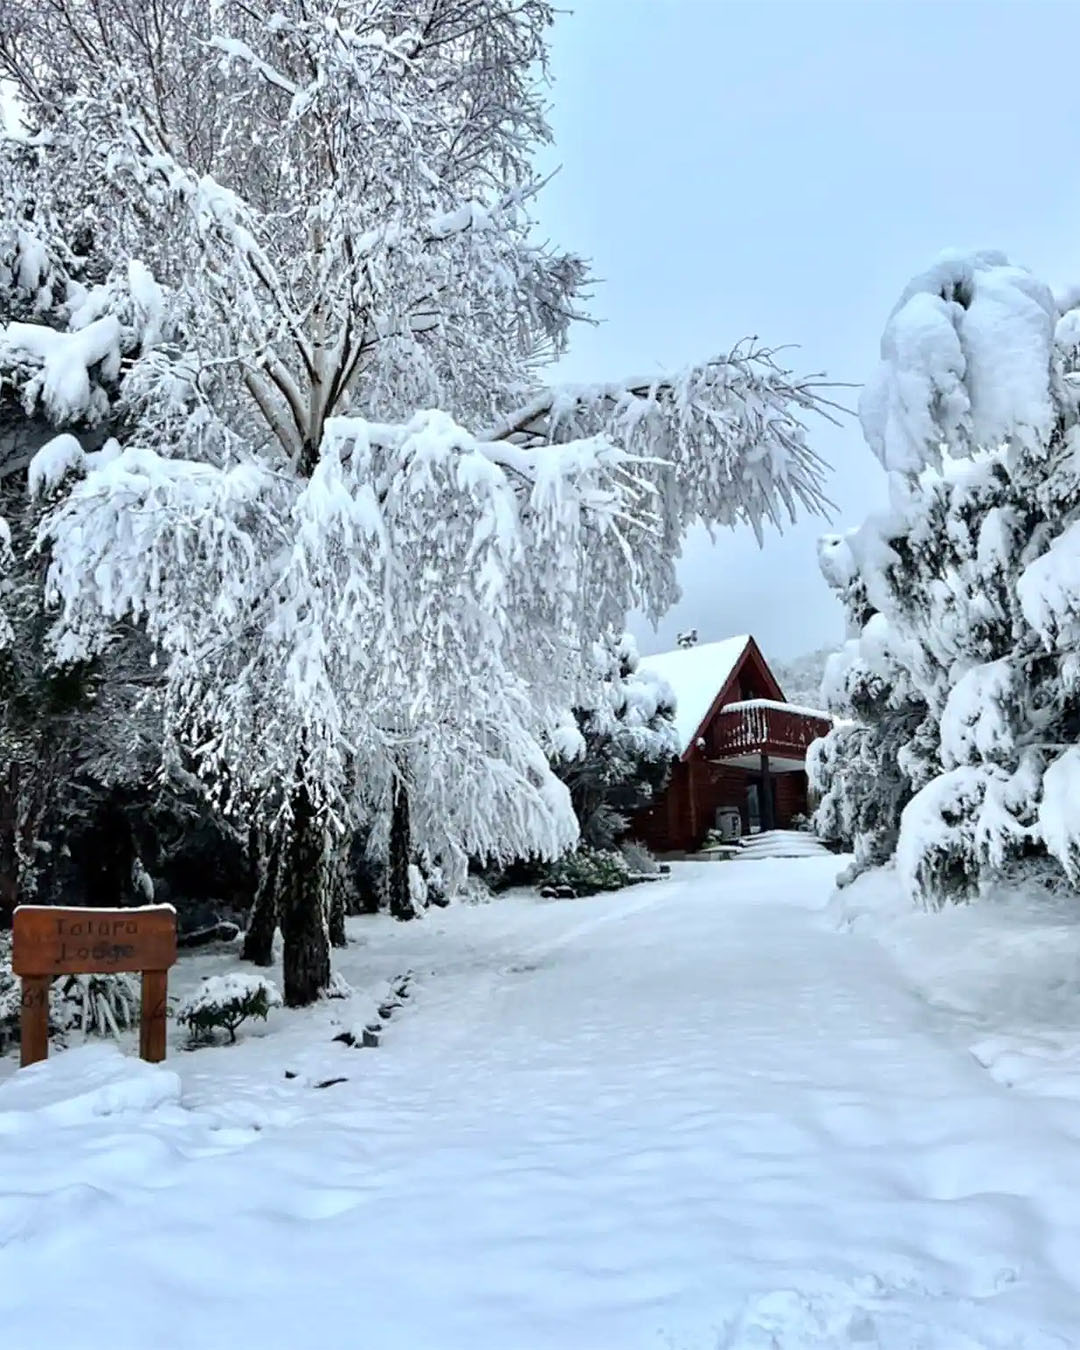 Totara Lodge is shown covered in snow from the outside with a sign pointing to it, one of the best airbnbs with fireplaces in NZ.